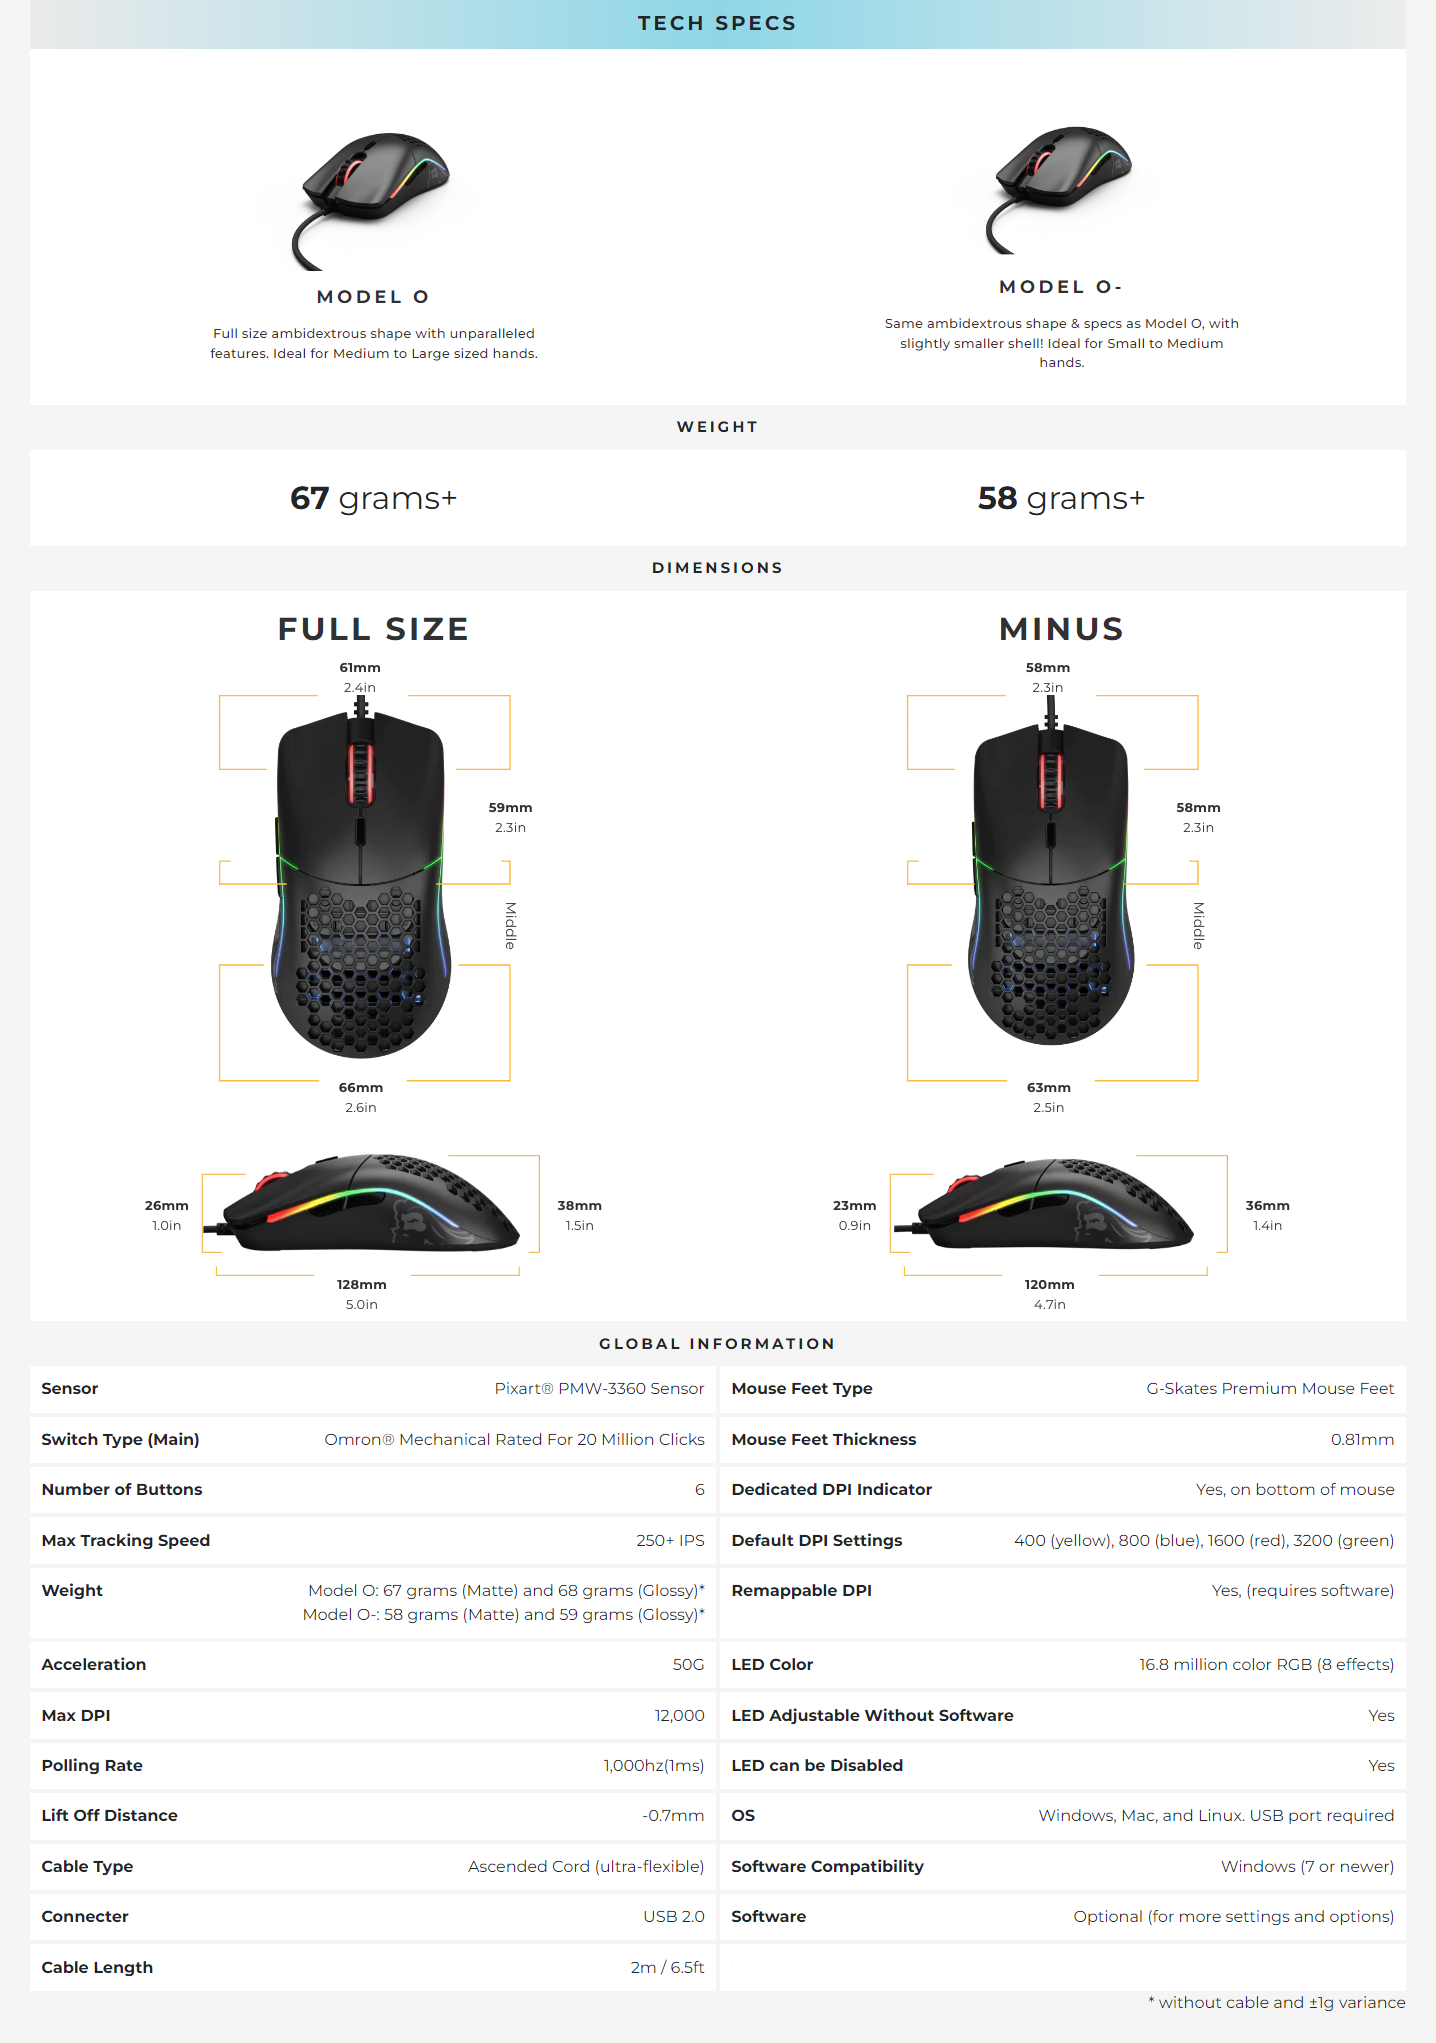 A large marketing image providing additional information about the product Glorious Model O Minus Wired Gaming Mouse - Matte Black - Additional alt info not provided